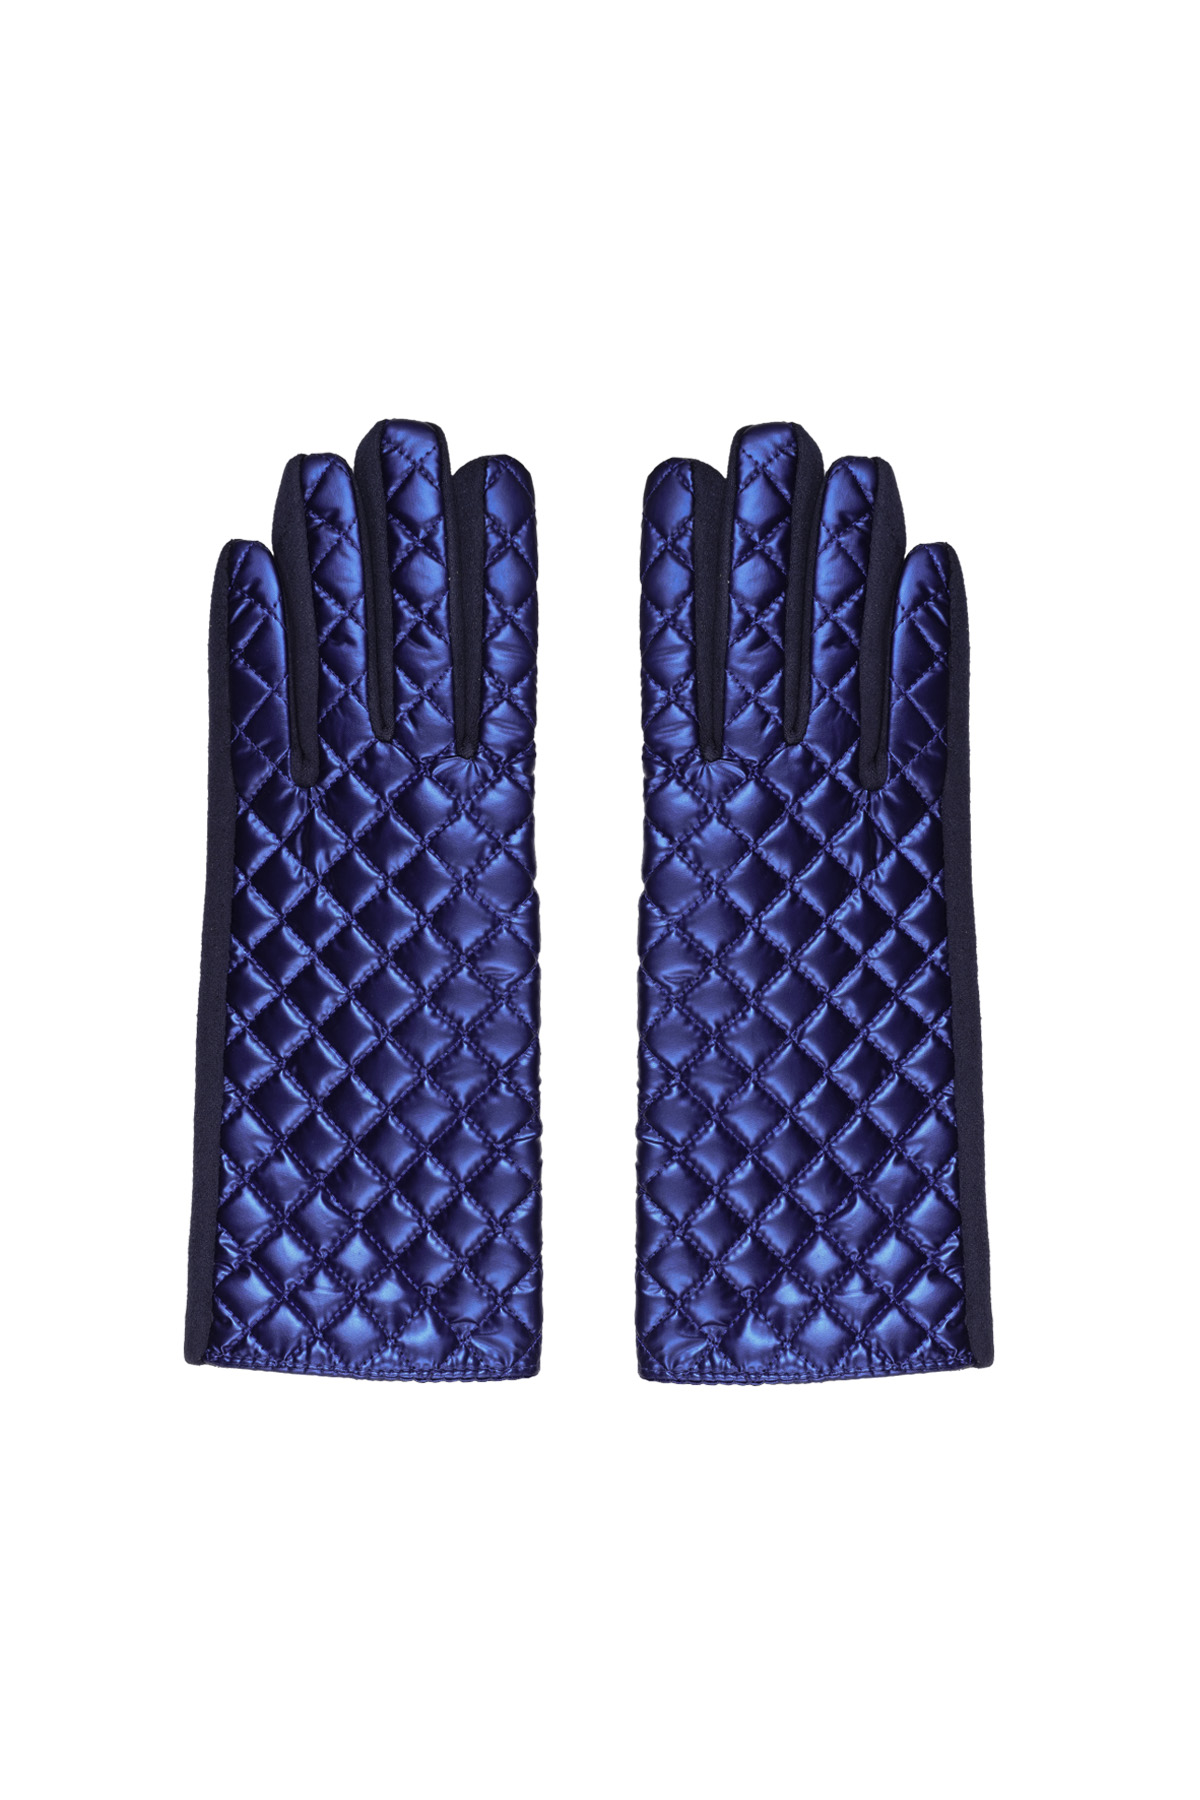 Gloves with stitched pattern - blue h5 